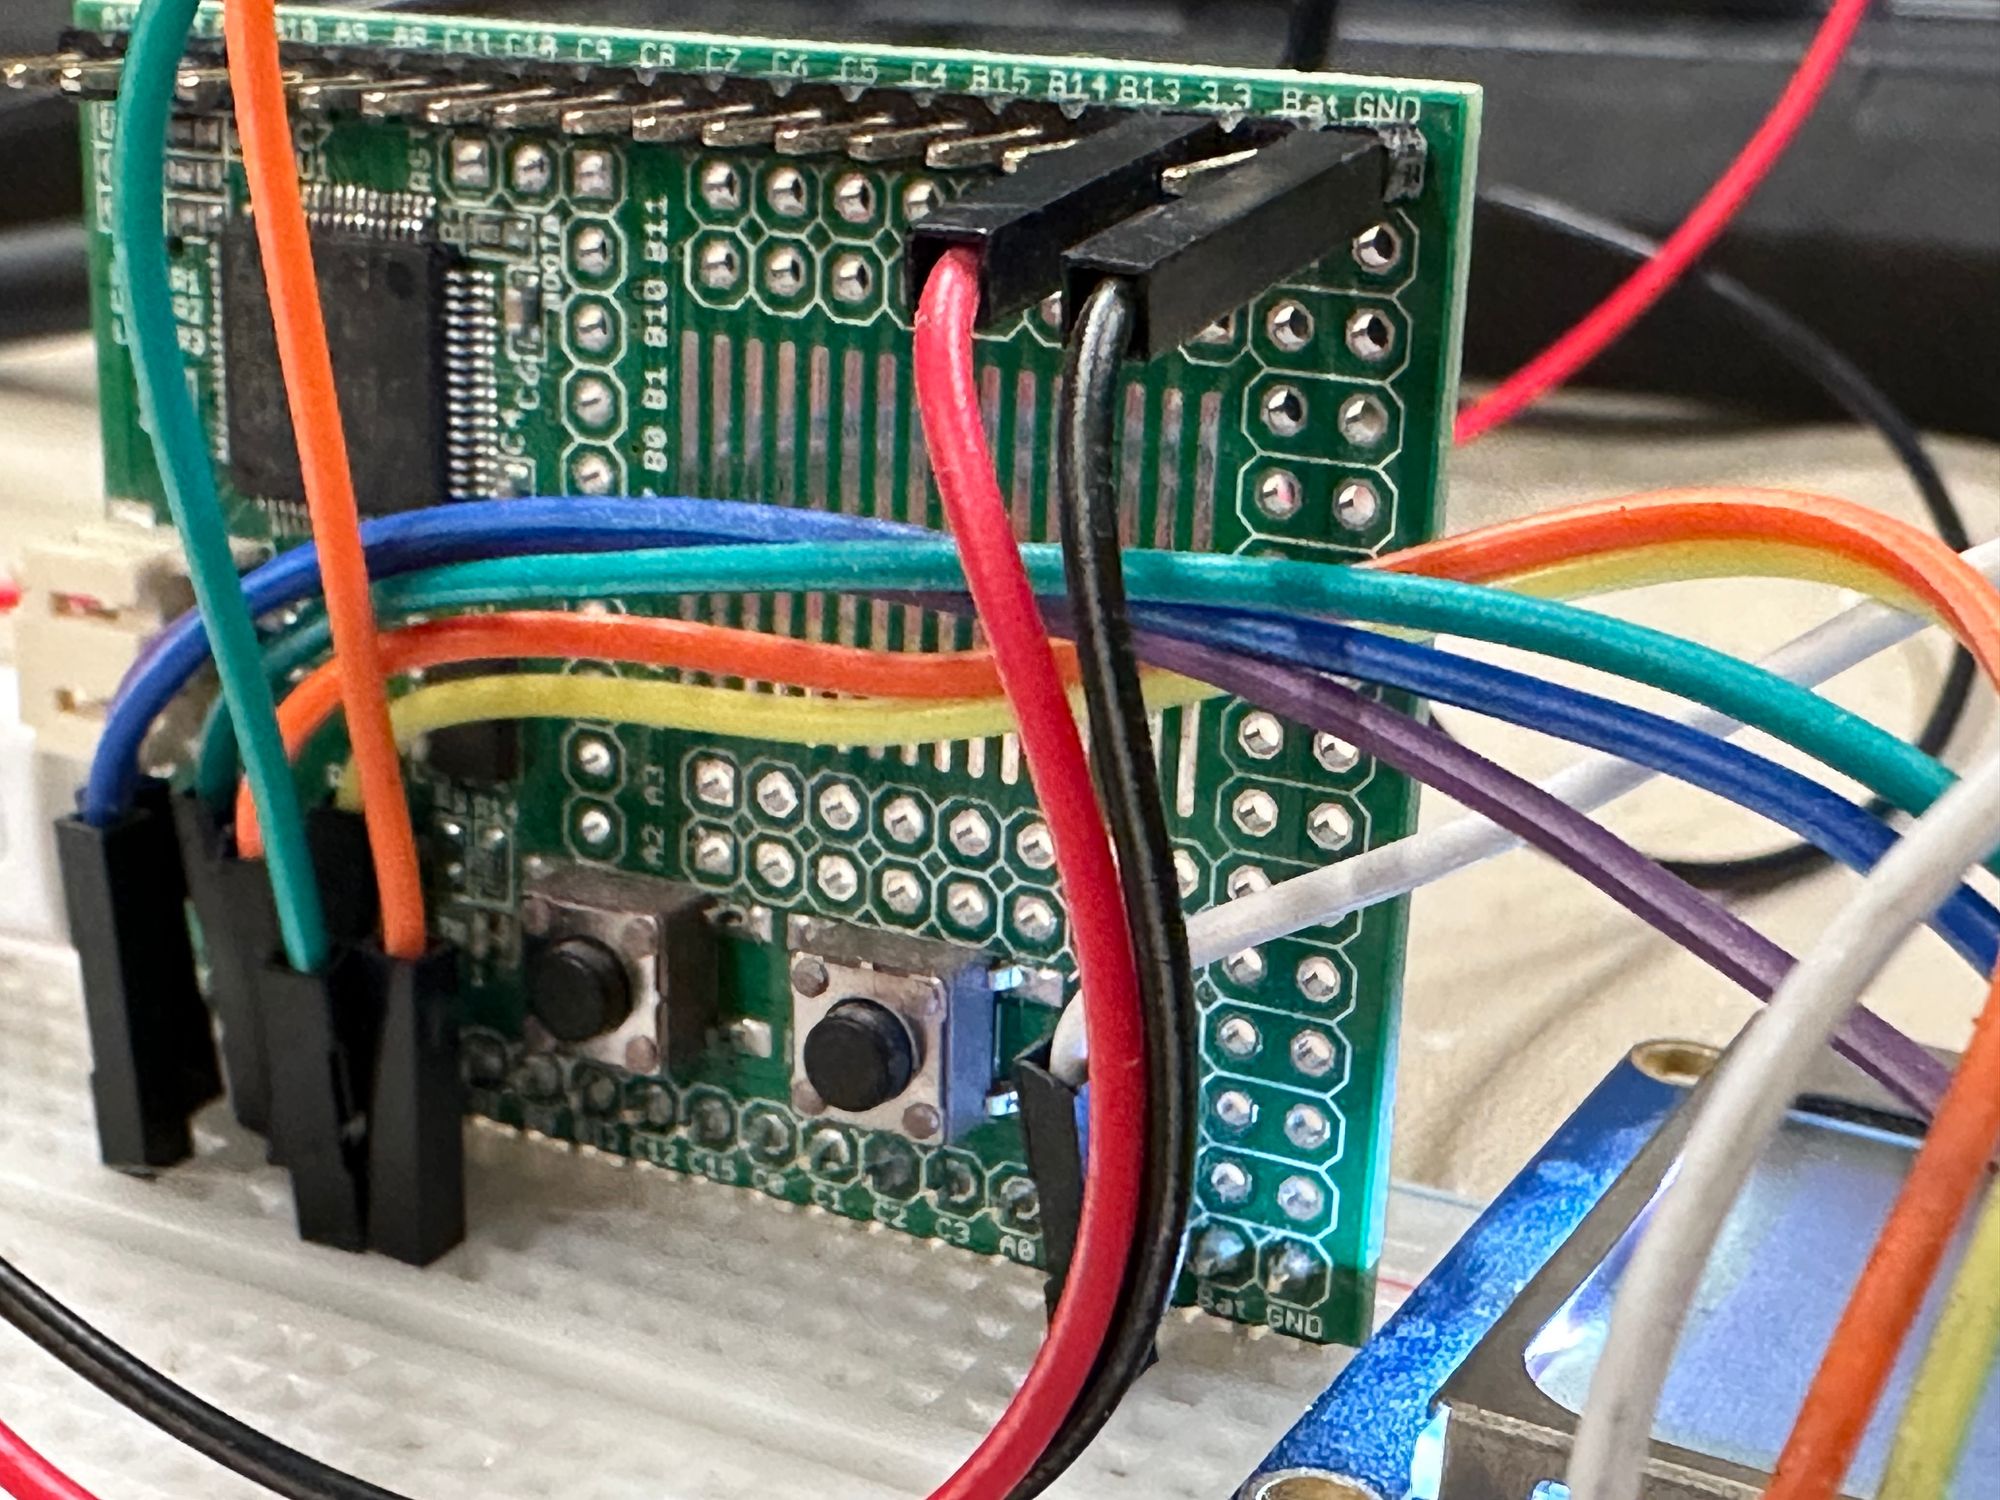 Original Espruino board mounted on a solderless breadboard with a variety of colored jumper wires.